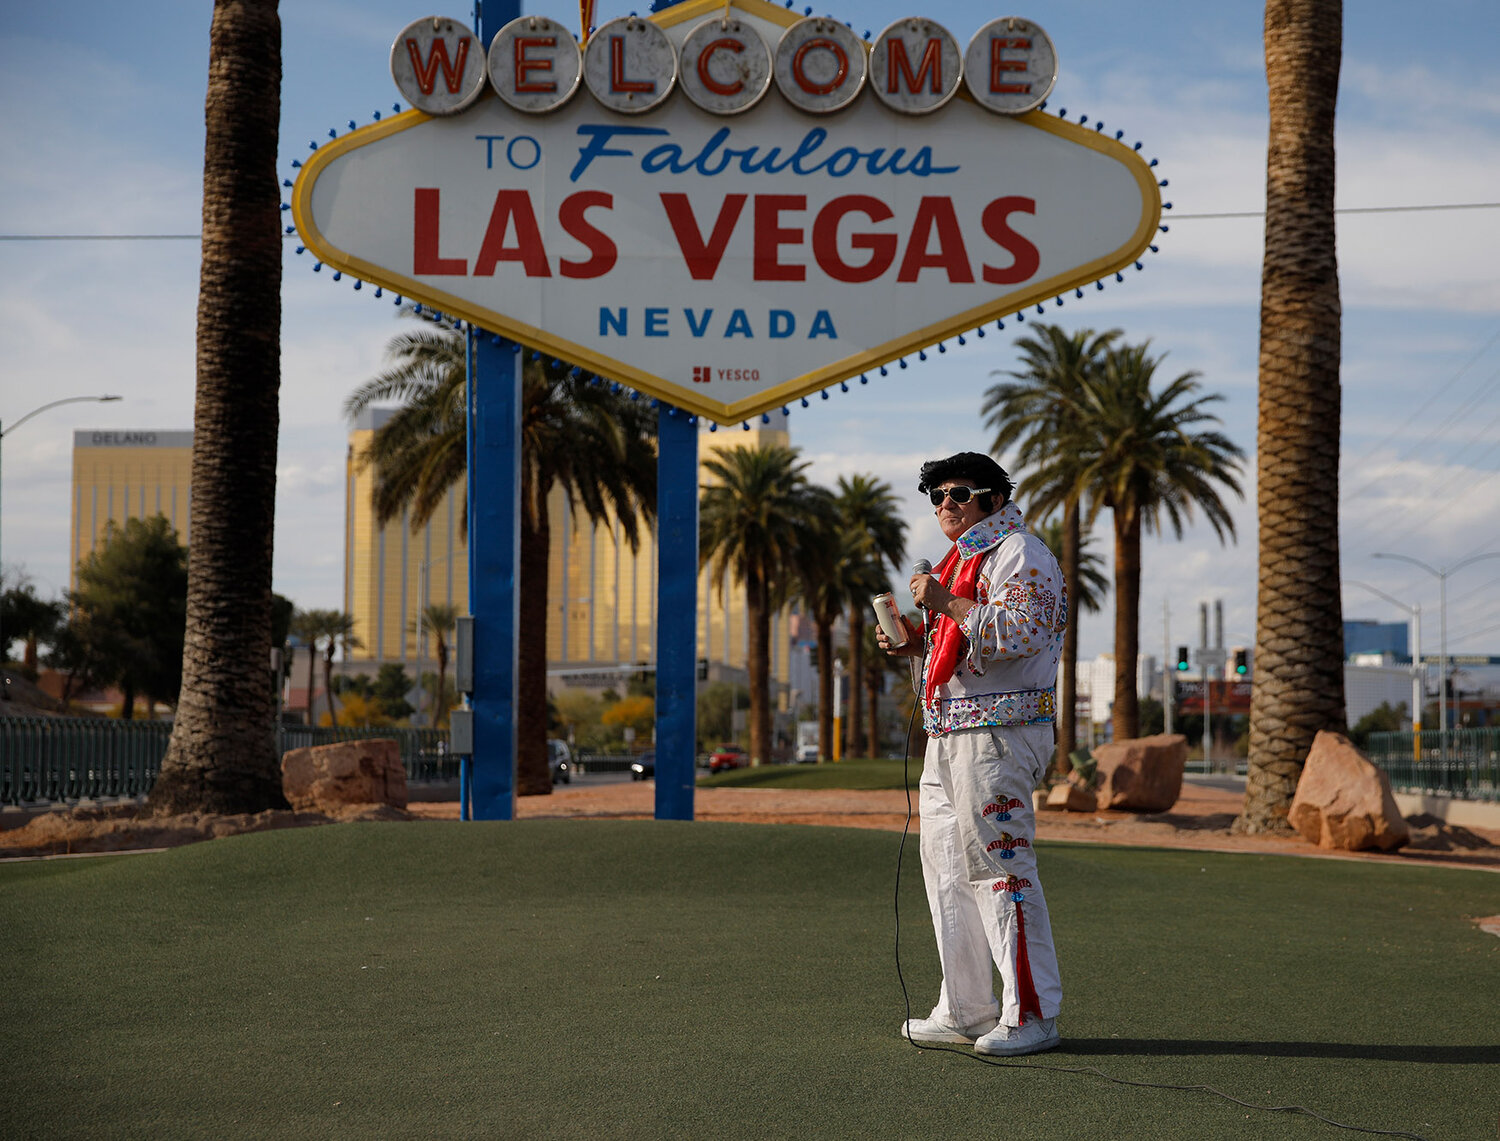 Muted and vacant, Las Vegas struggles to survive shutdown - AP Photos.